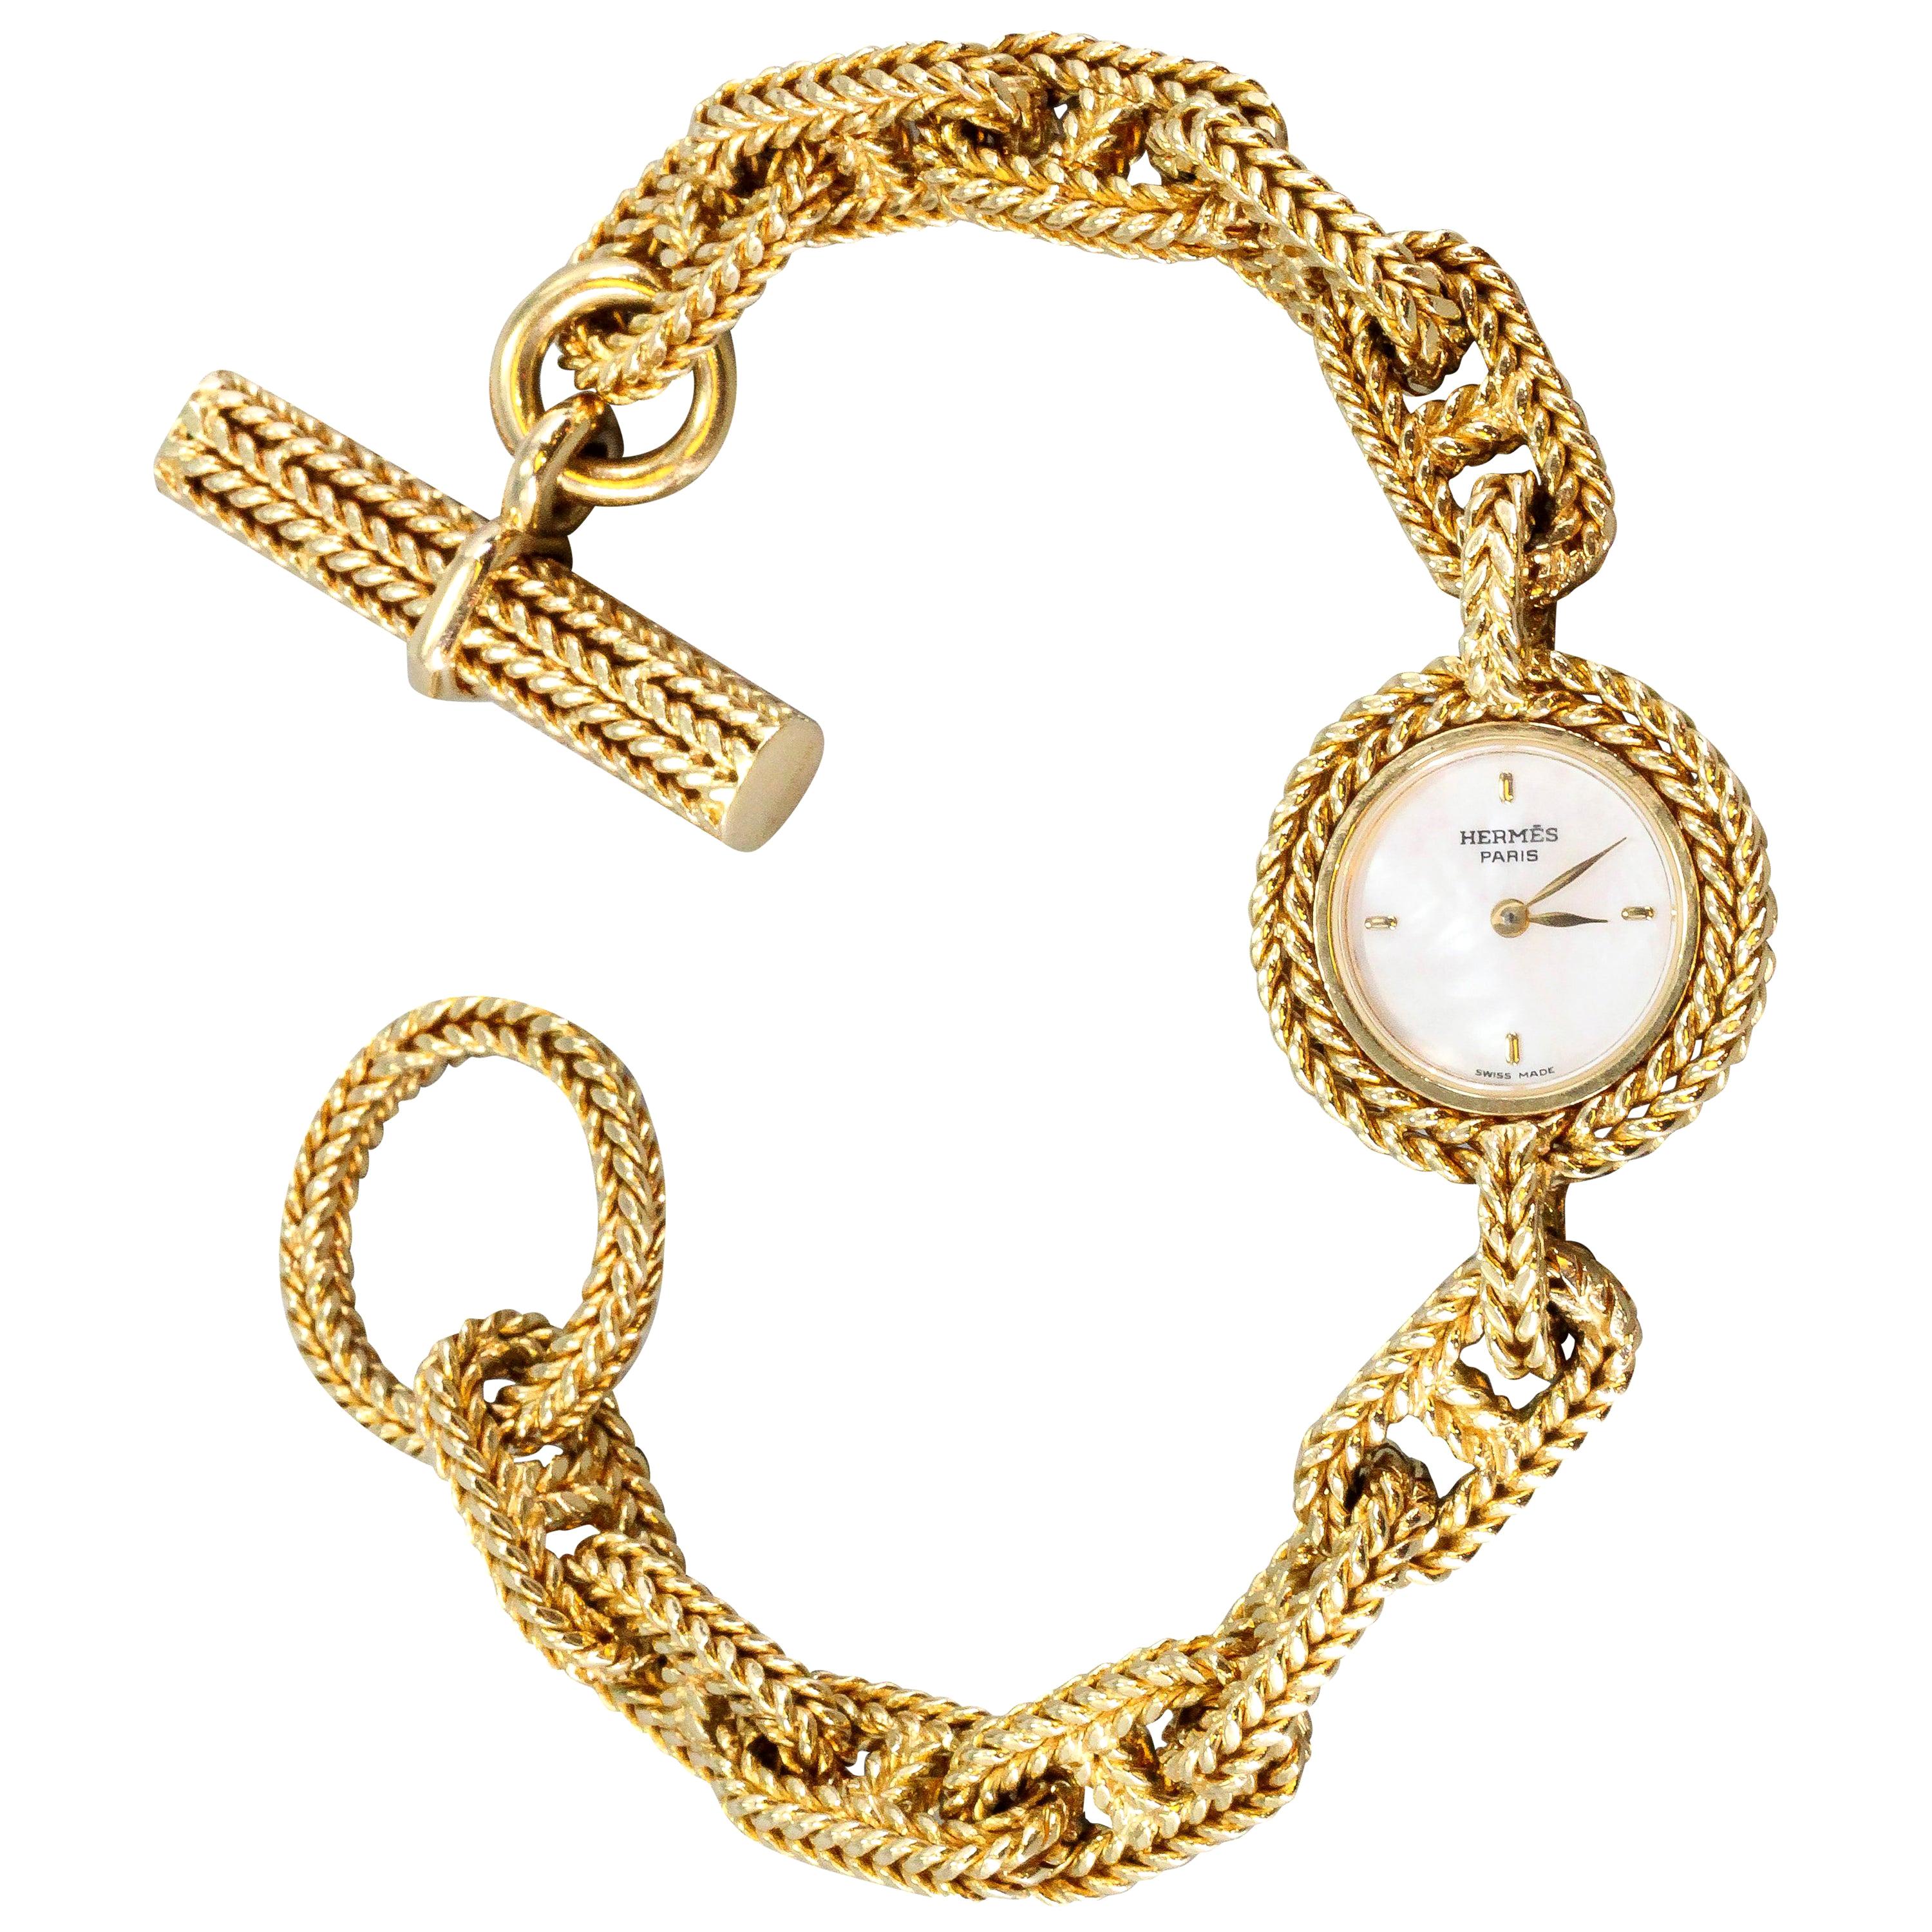 Hermes Paris Chaine D'Ancre Toggle Link Yellow Gold Wristwatch